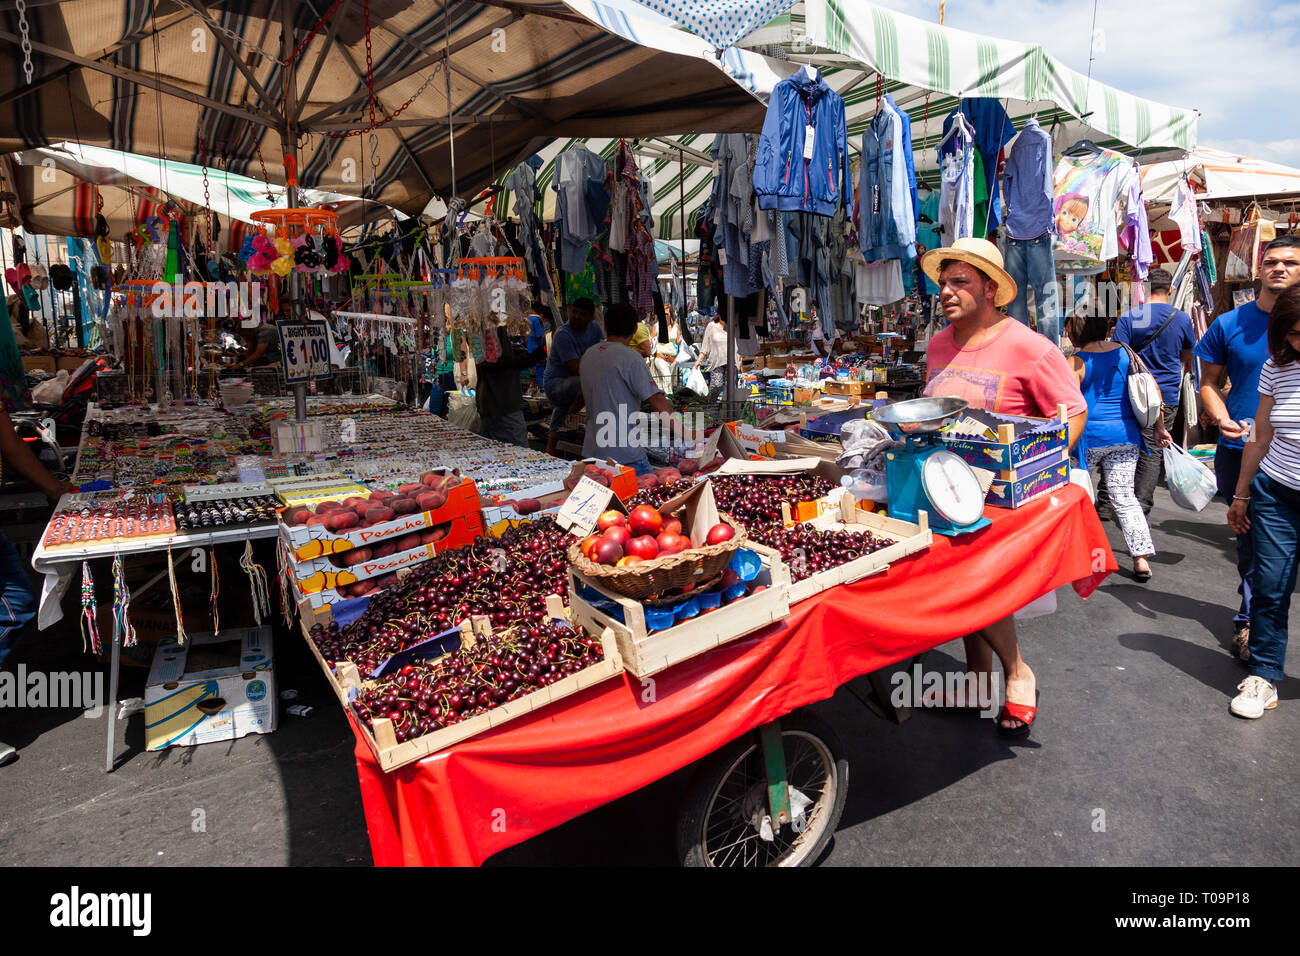 Fruit cart being pushed through a flea market in Catania, Sicily, Italy Stock Photo